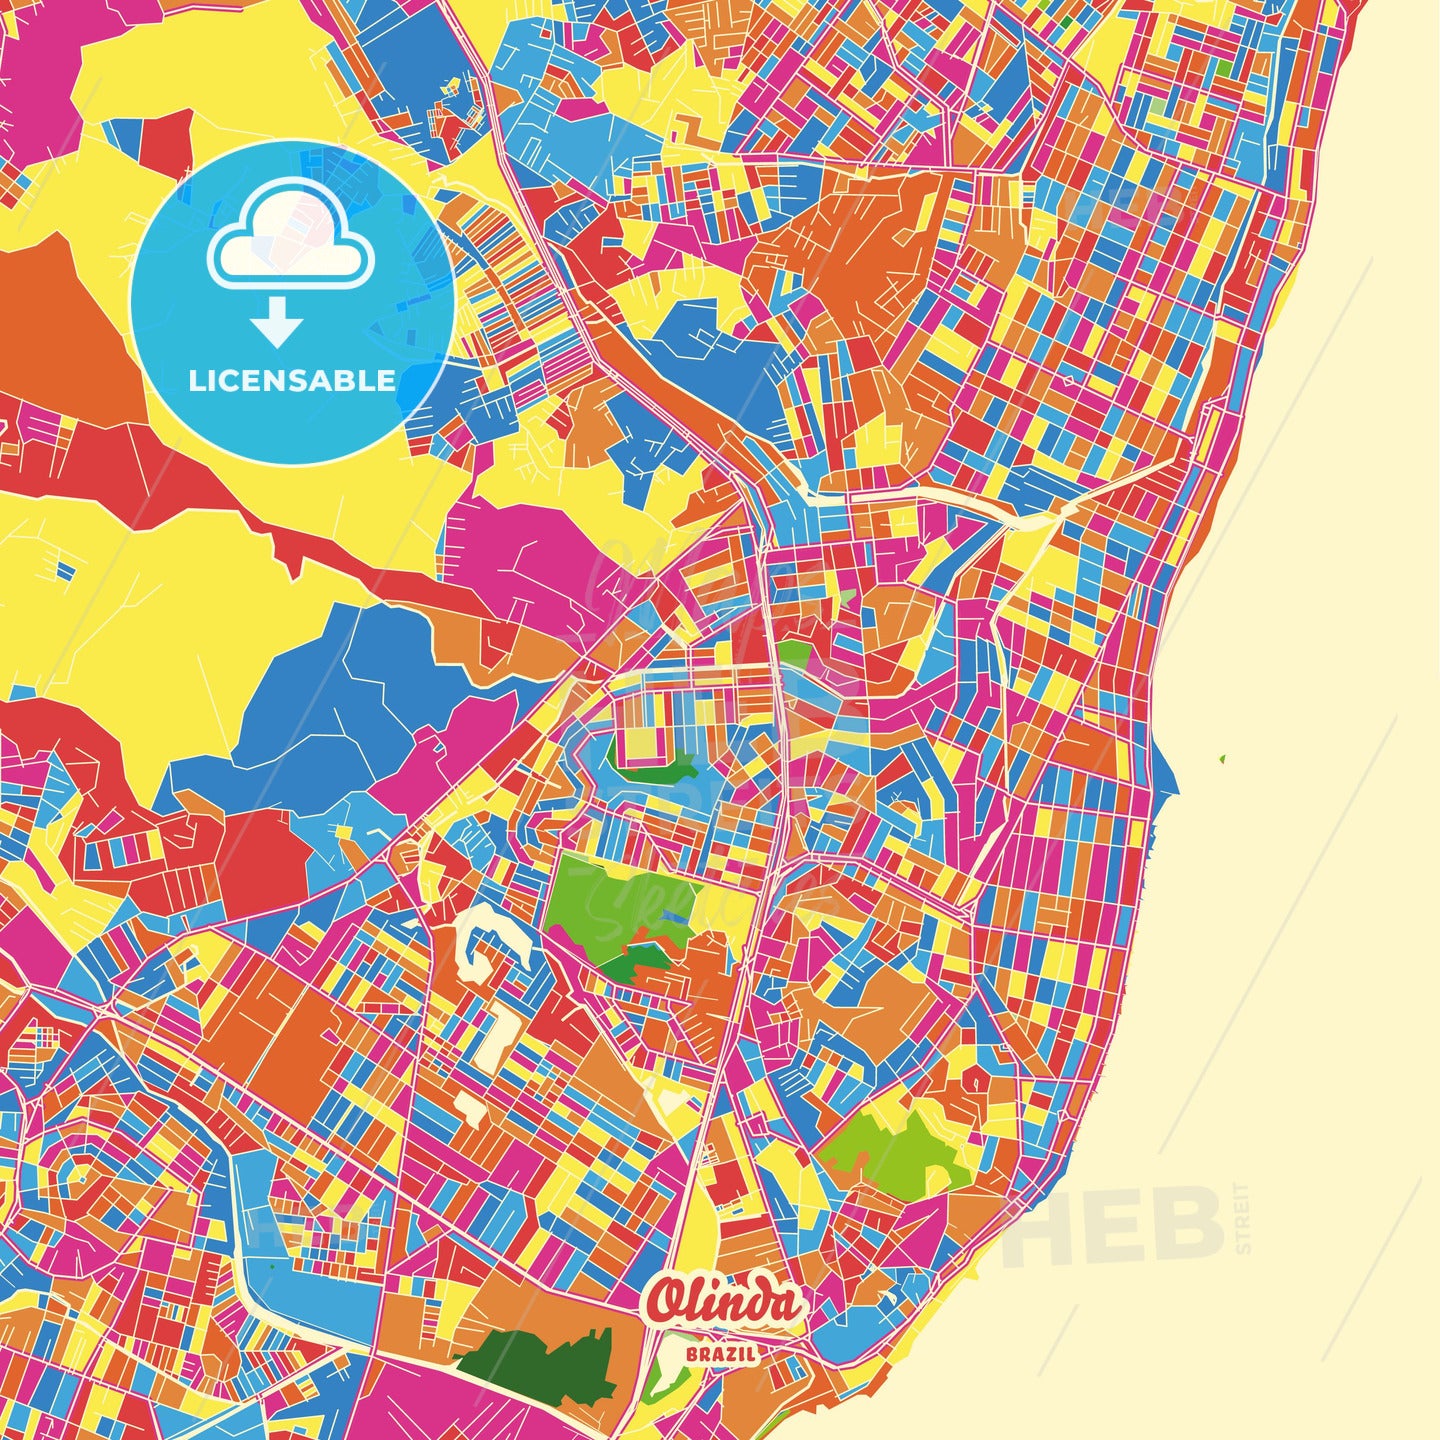 Olinda, Brazil Crazy Colorful Street Map Poster Template - HEBSTREITS Sketches